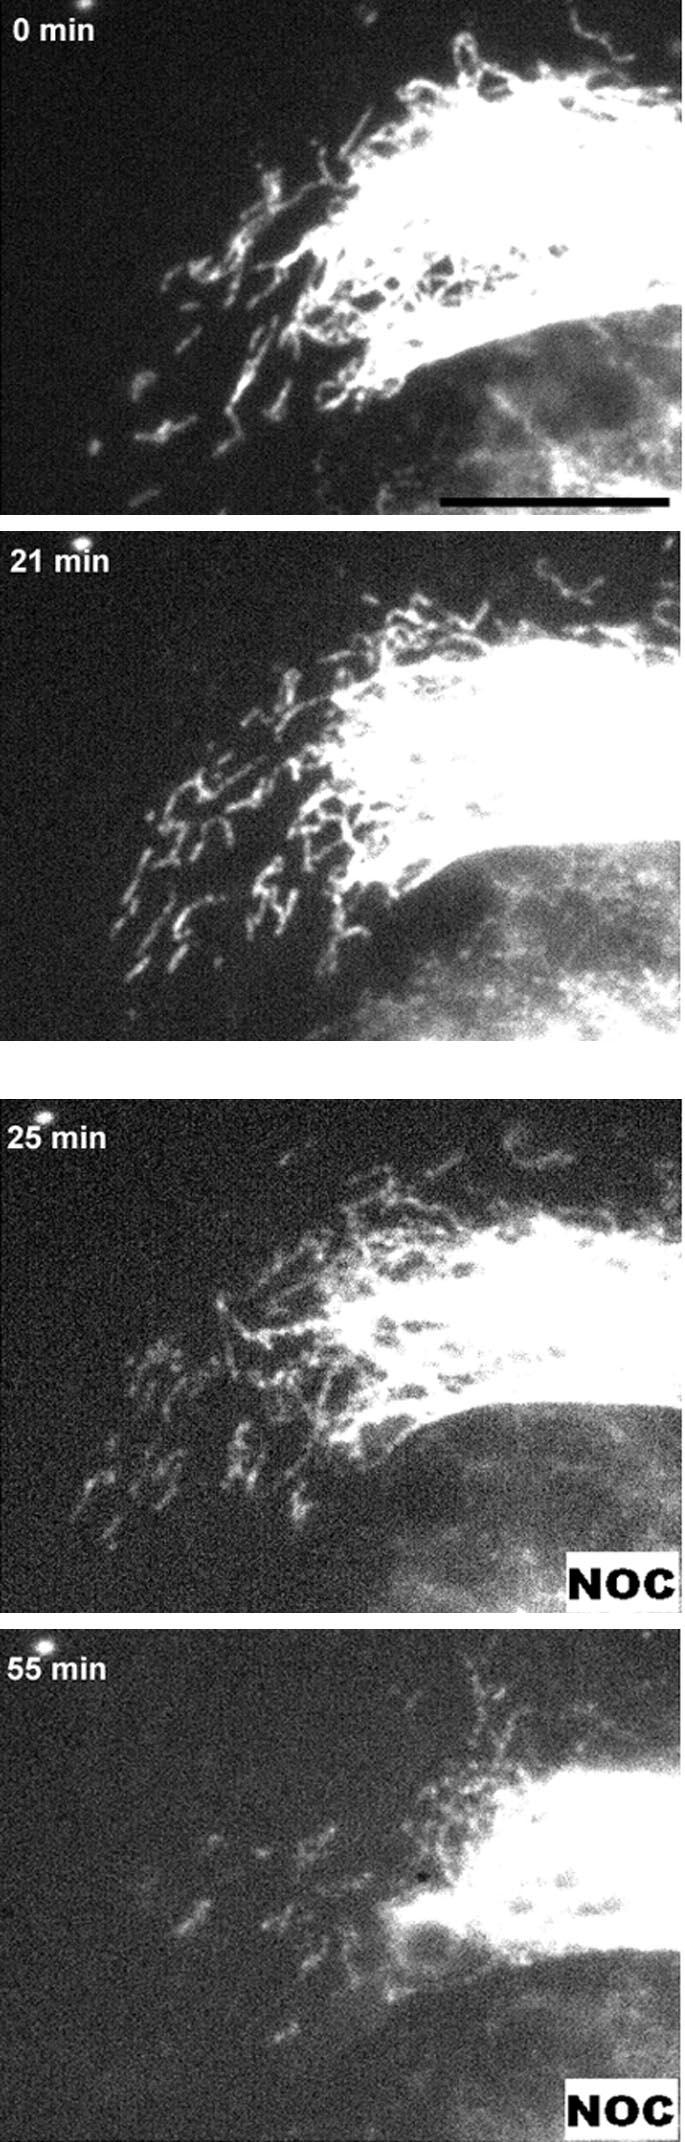 J.L. Martys et al. perfusion of 20 m nocodazole. In Movie 6, the effect of nocodazole on both filament extension and fragment movement is presented (Figure 6).